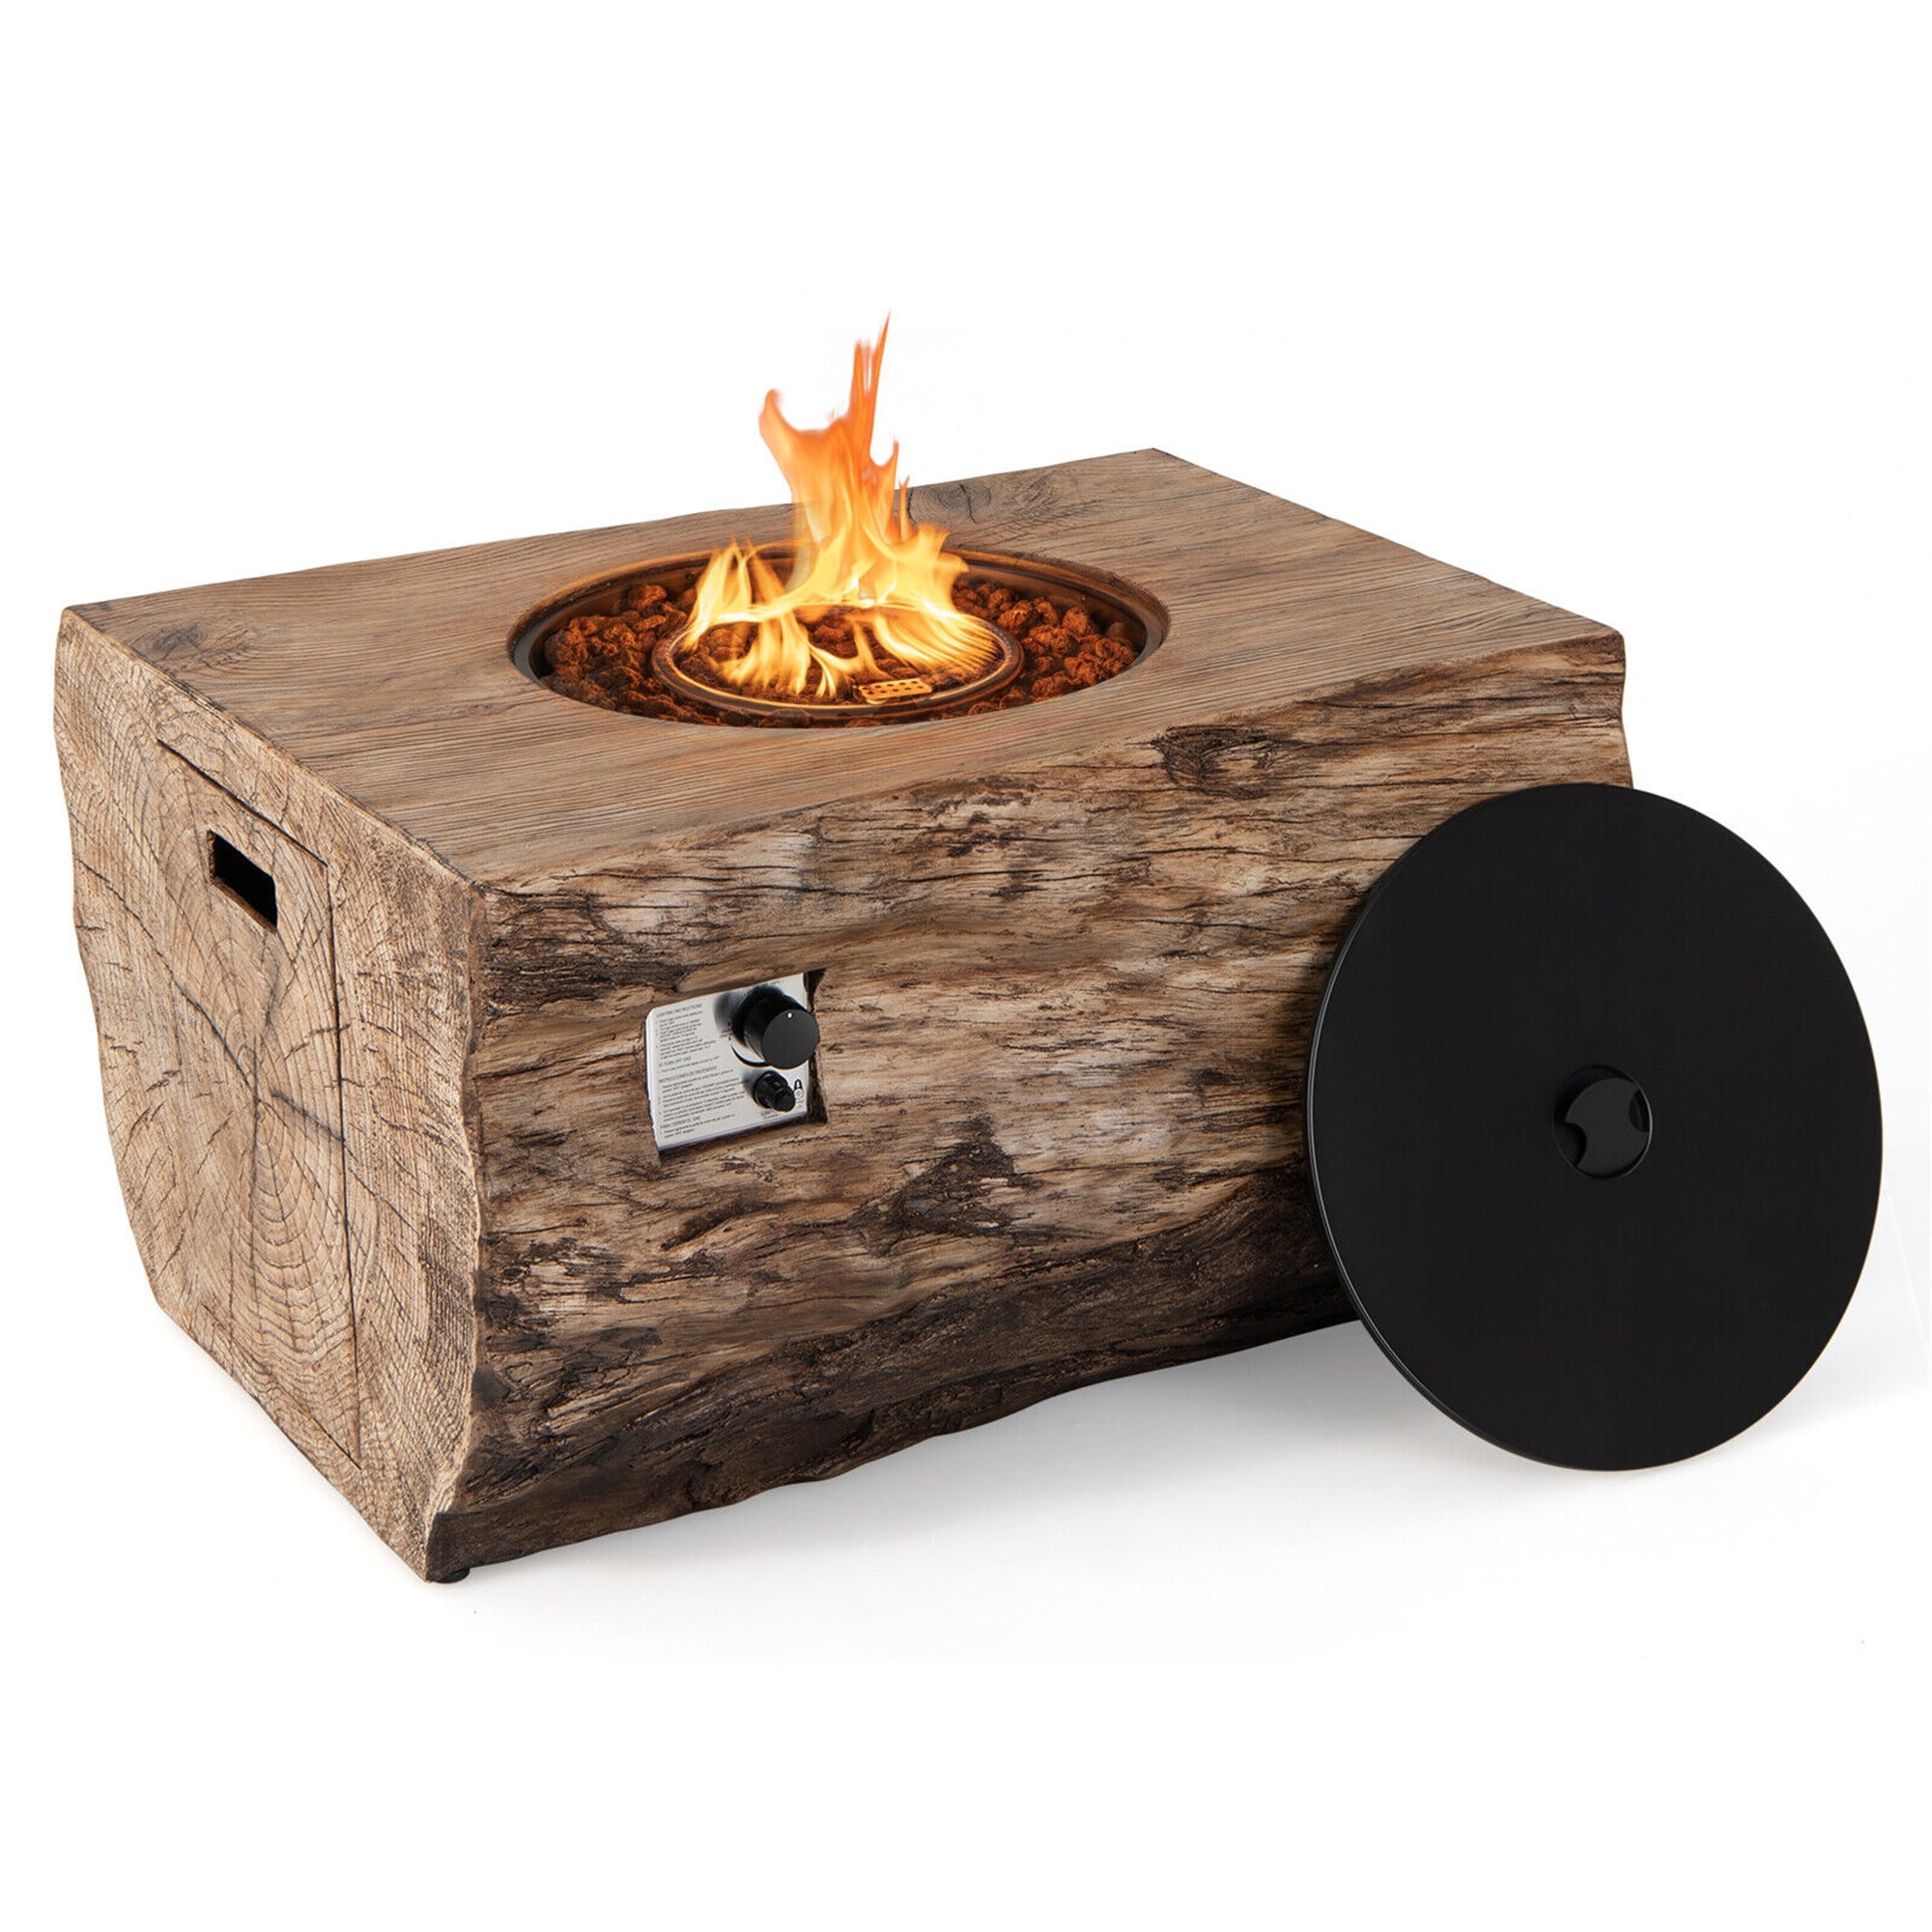 Clihome 40 In. Rectangle Propane Fire Pit Table Wood-Like Surface with Lava Rock PVC Cover